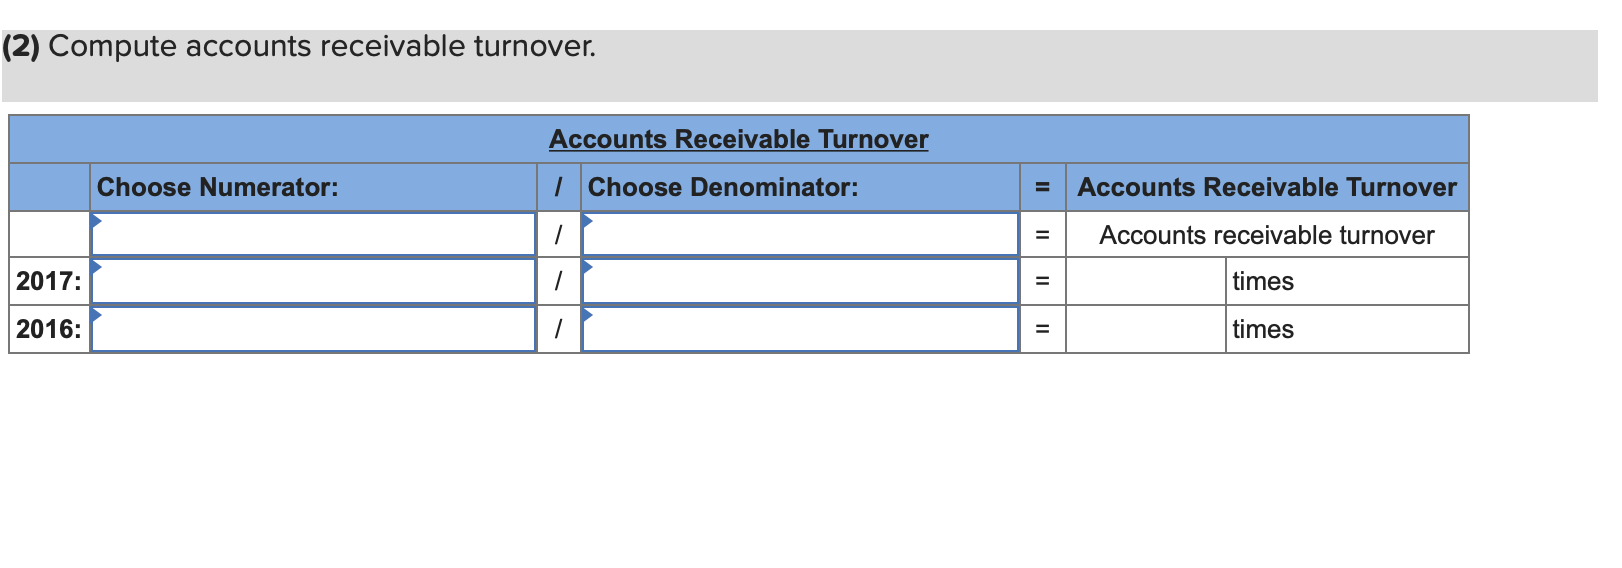 gooyear tire and rubber account receivable turnover